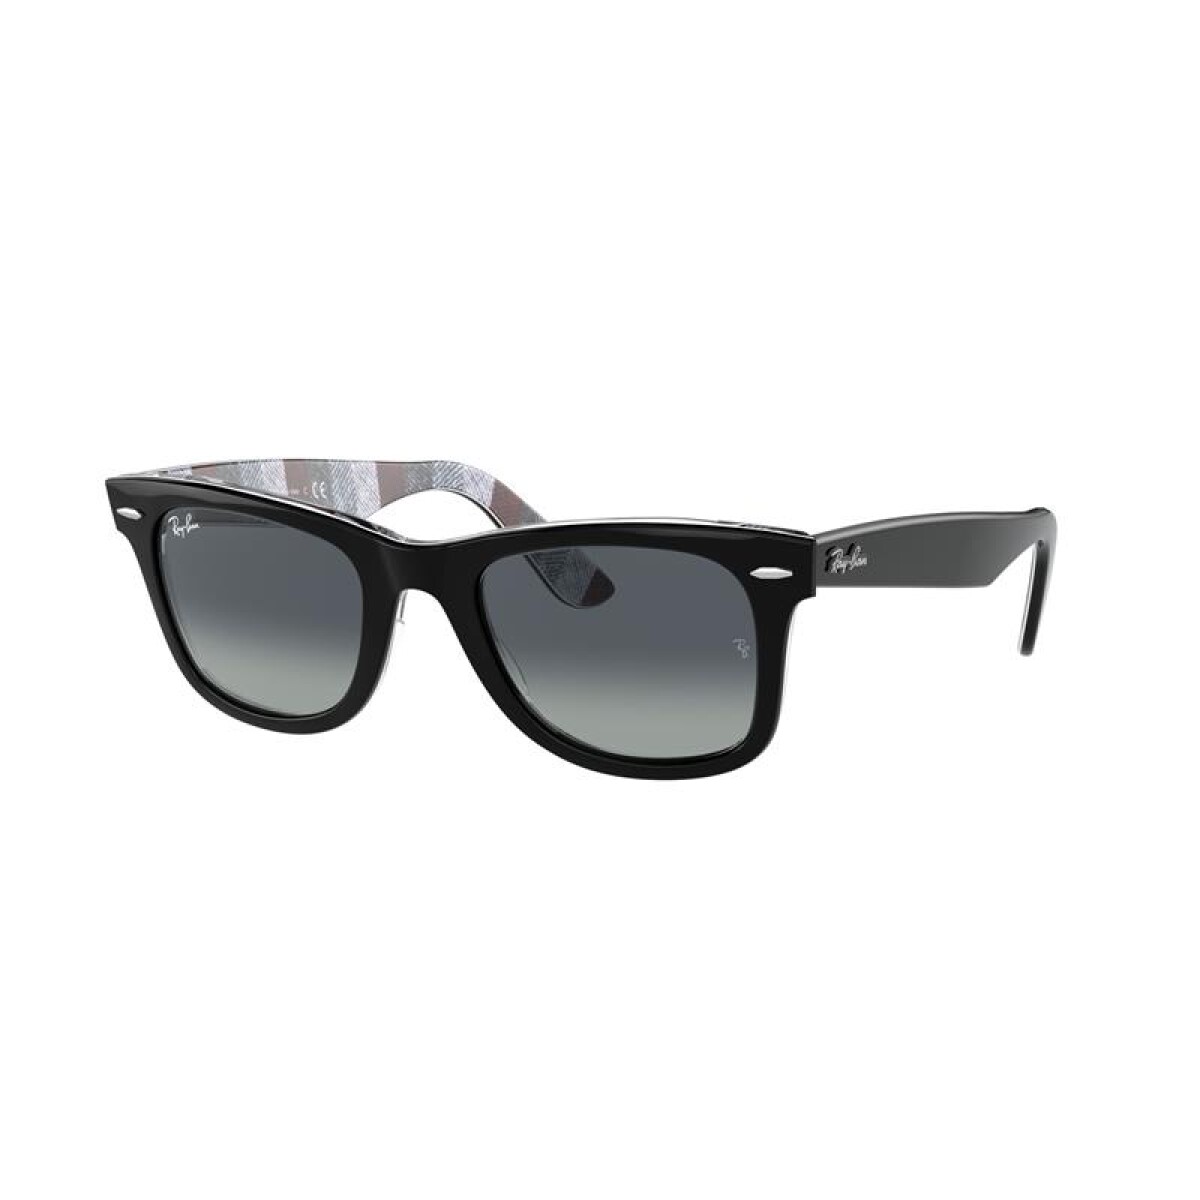 Ray Ban Rb2140 - 1318/3a 